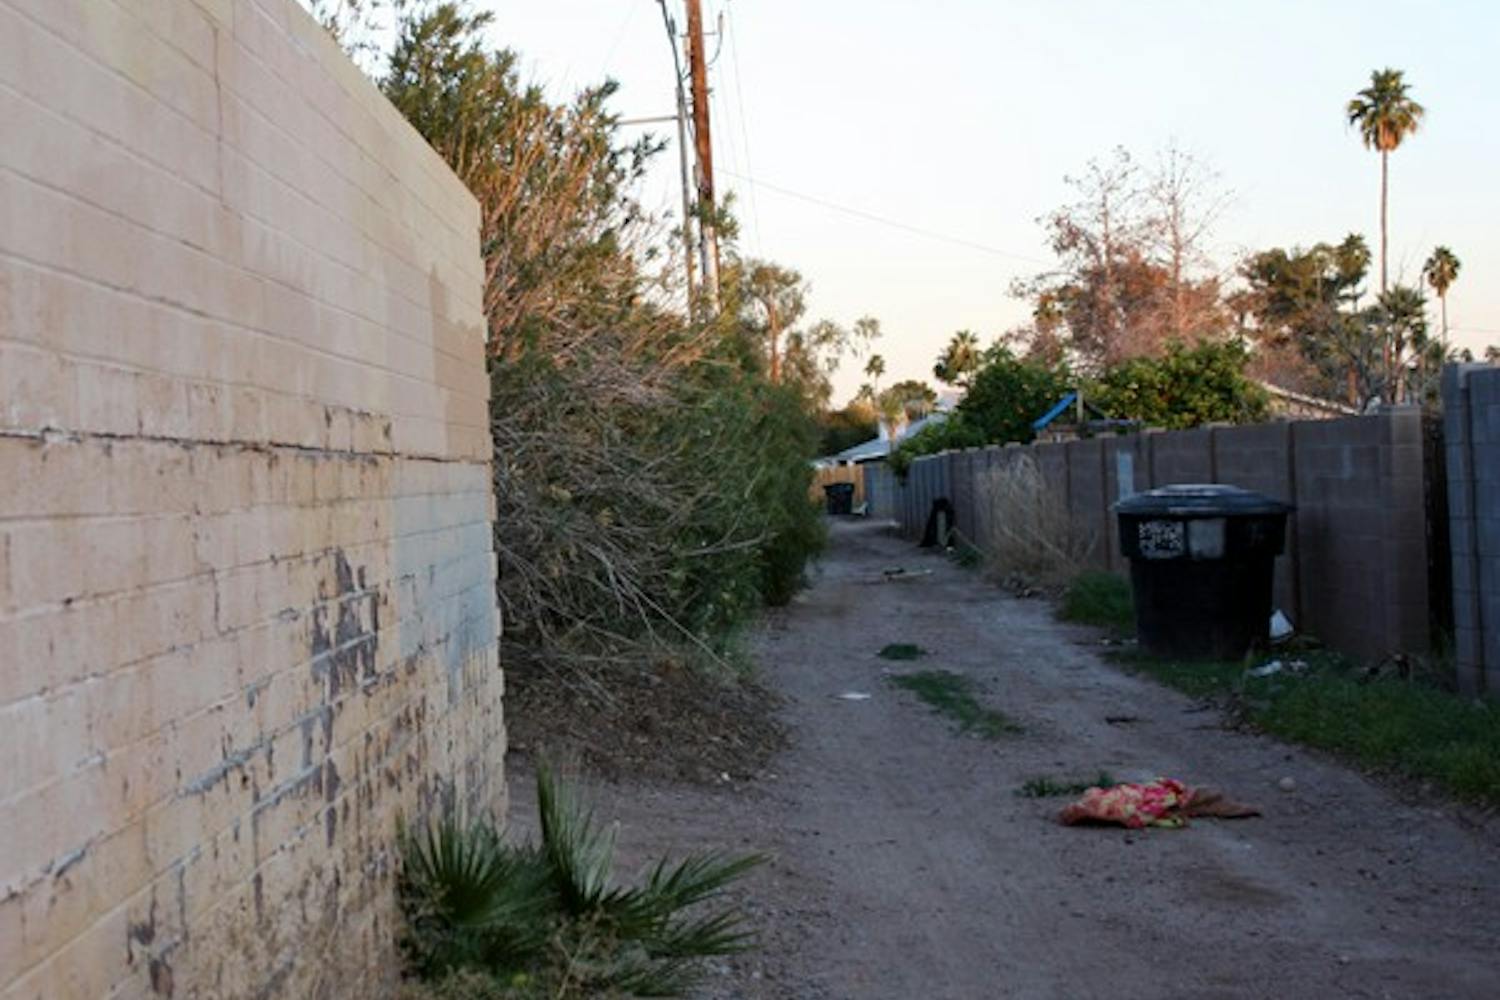 The proposed Solid Waste Alley Ordinance hopes to go into effect within the next two months. The ordinance will provide Tempe Police officers the ability to kick out transients, unwanted riffraff and illicit activity. (Photo by Shawn Raymundo)